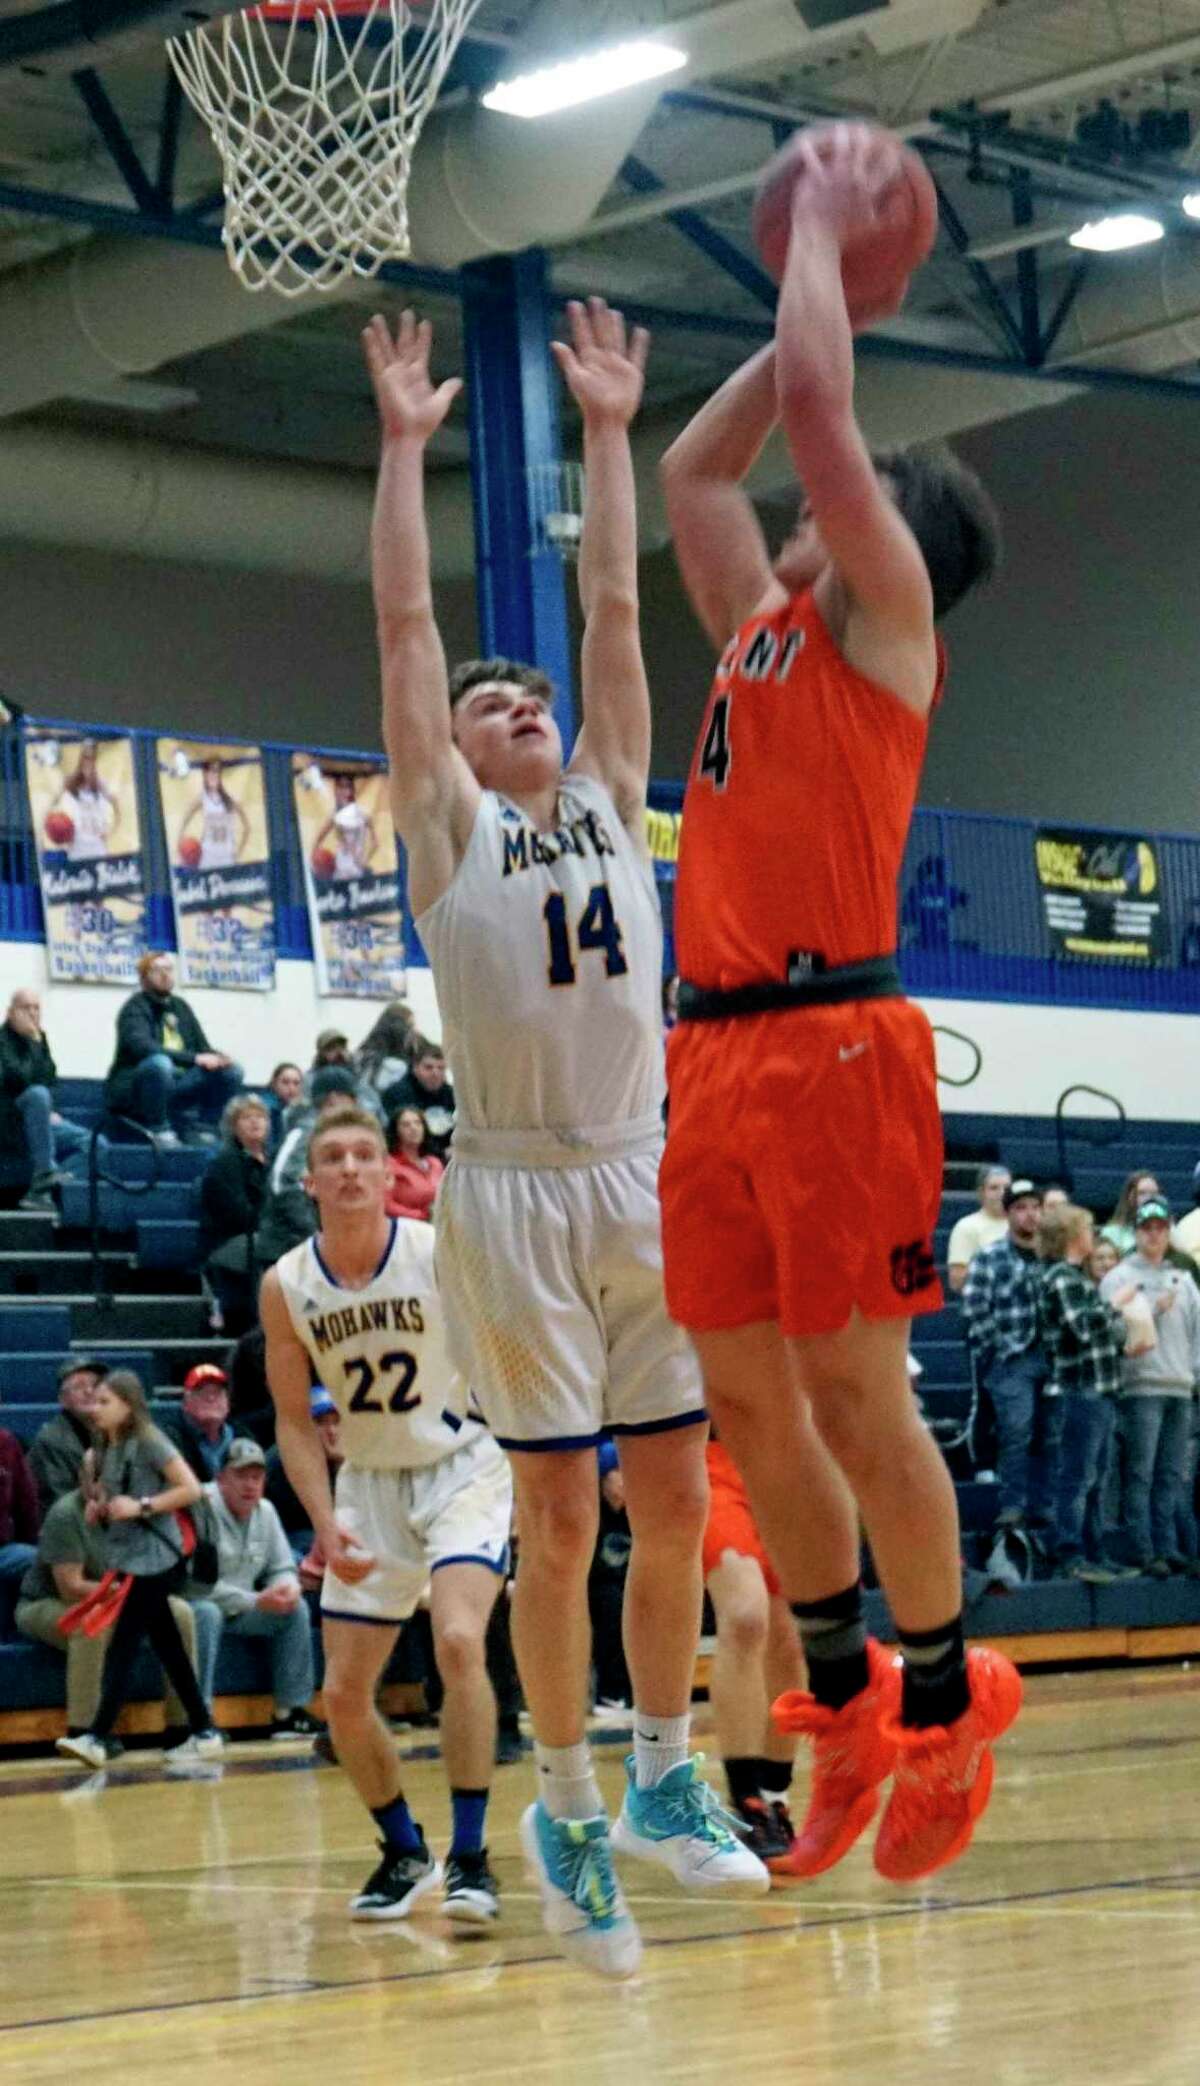 Morley Stanwood's Justin Cranney battles for a rebound in the Mohawk's home win. (Pioneer photo/Joe Judd)